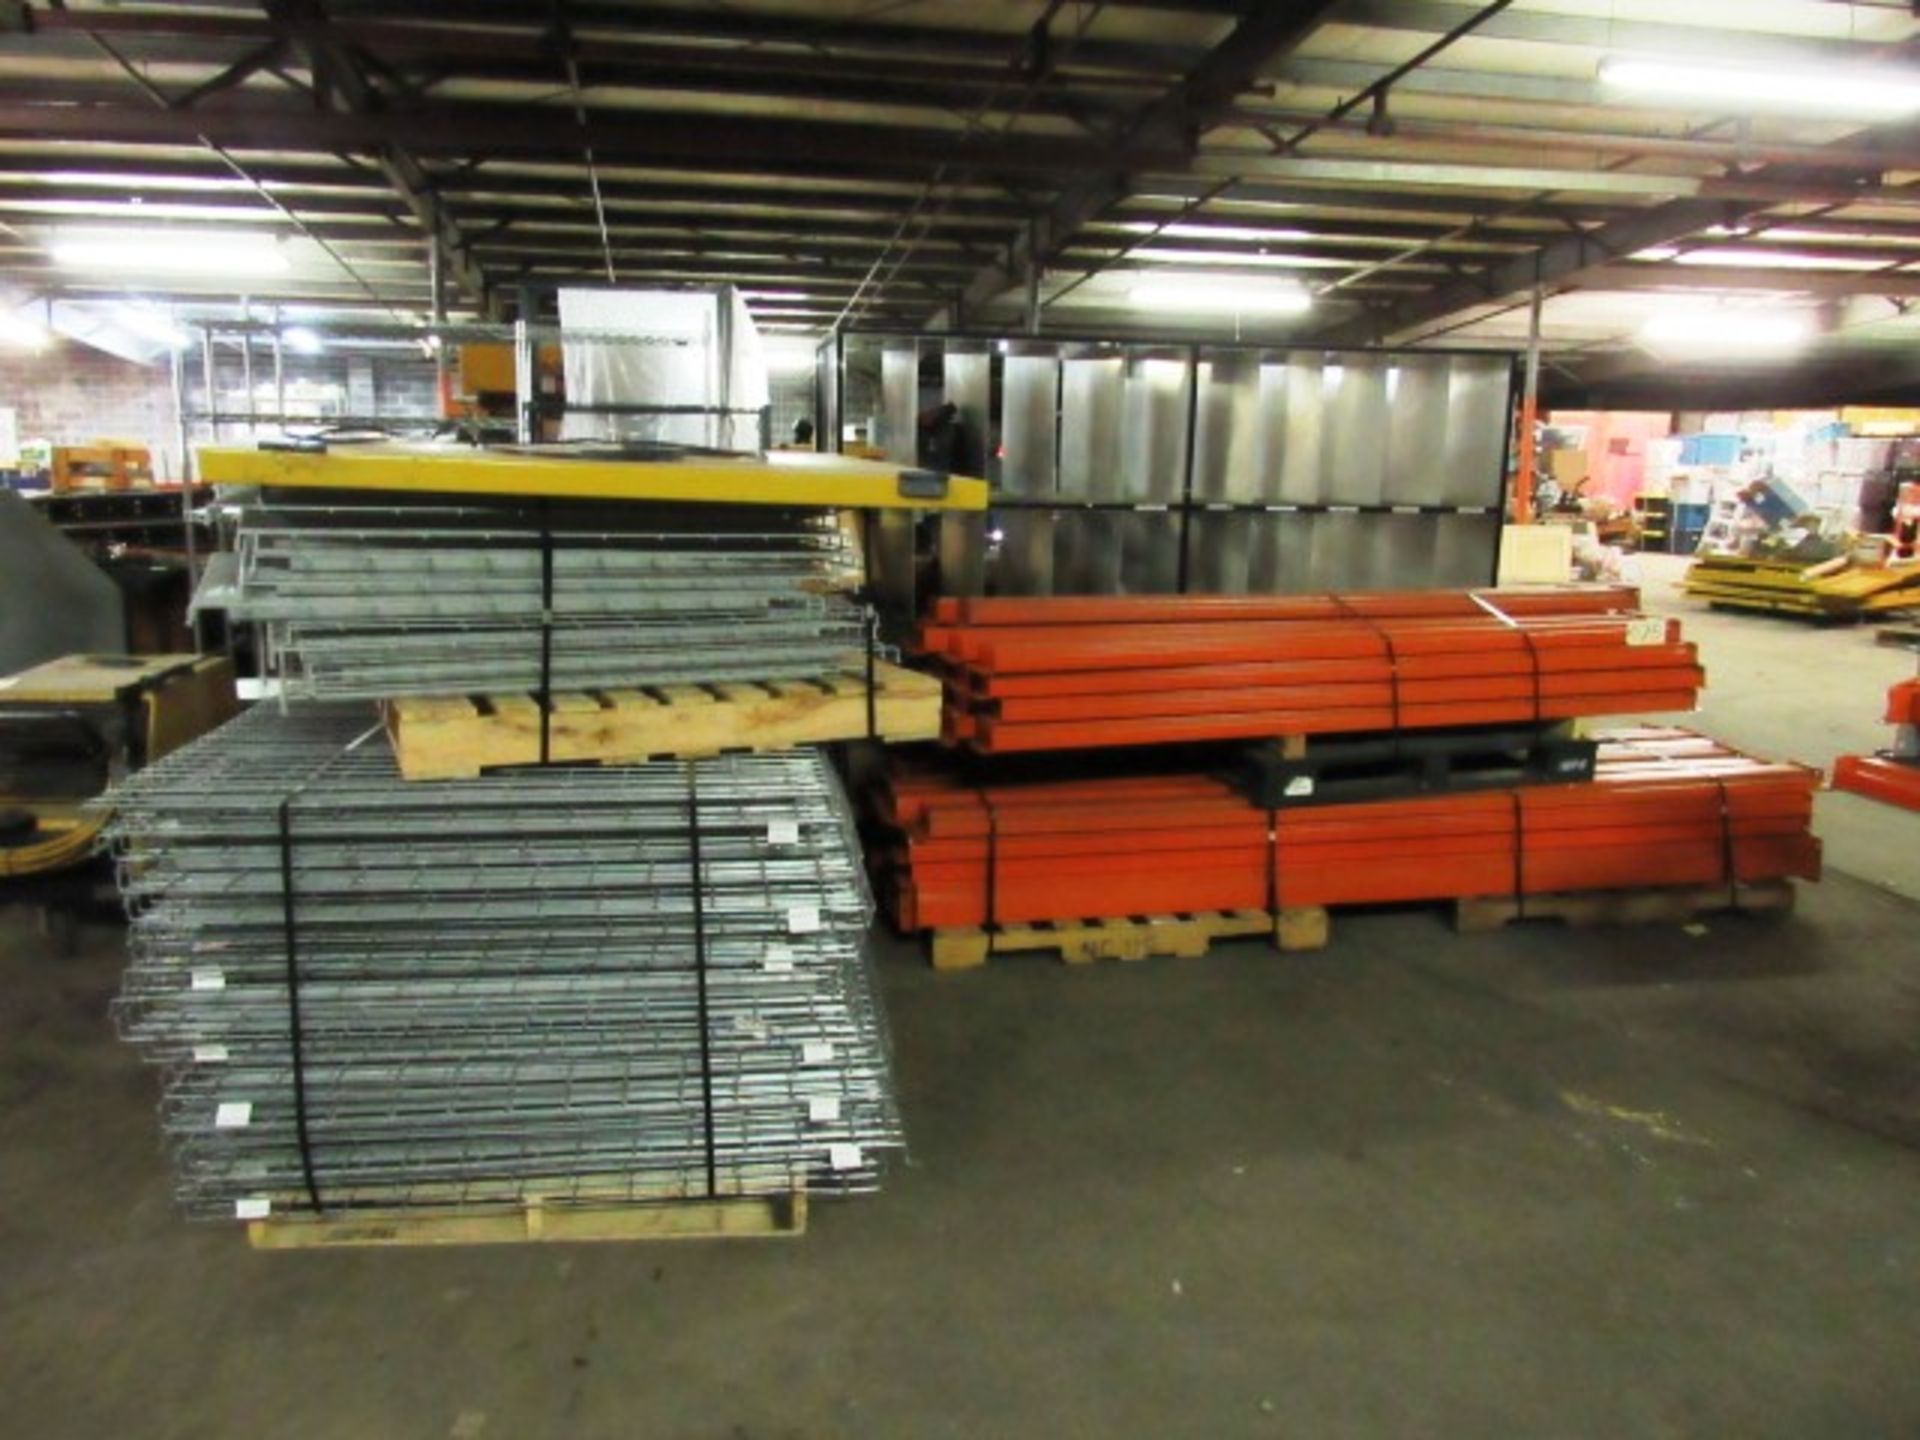 Approx 14 Sections of Pallet Racking with Grates